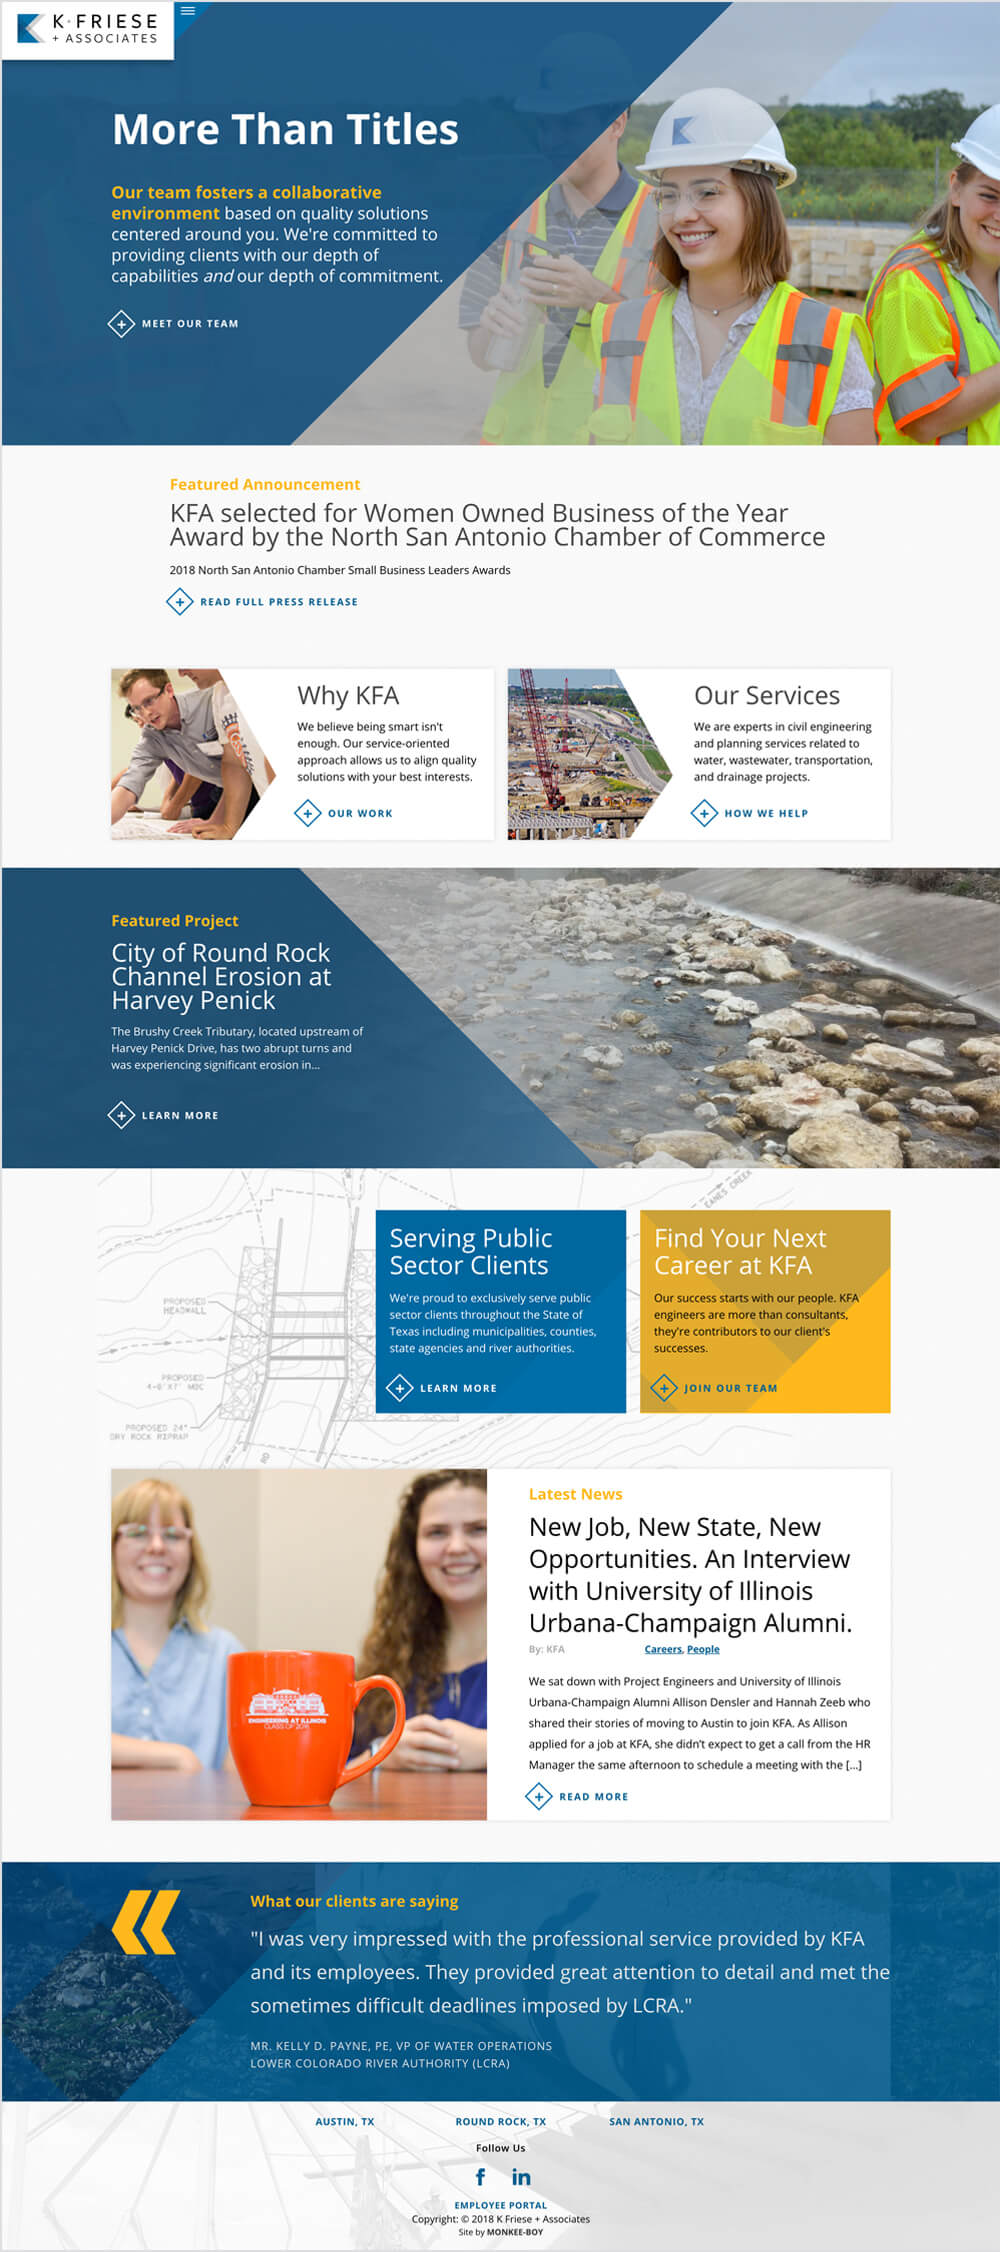 K Friese & Associates Home Page